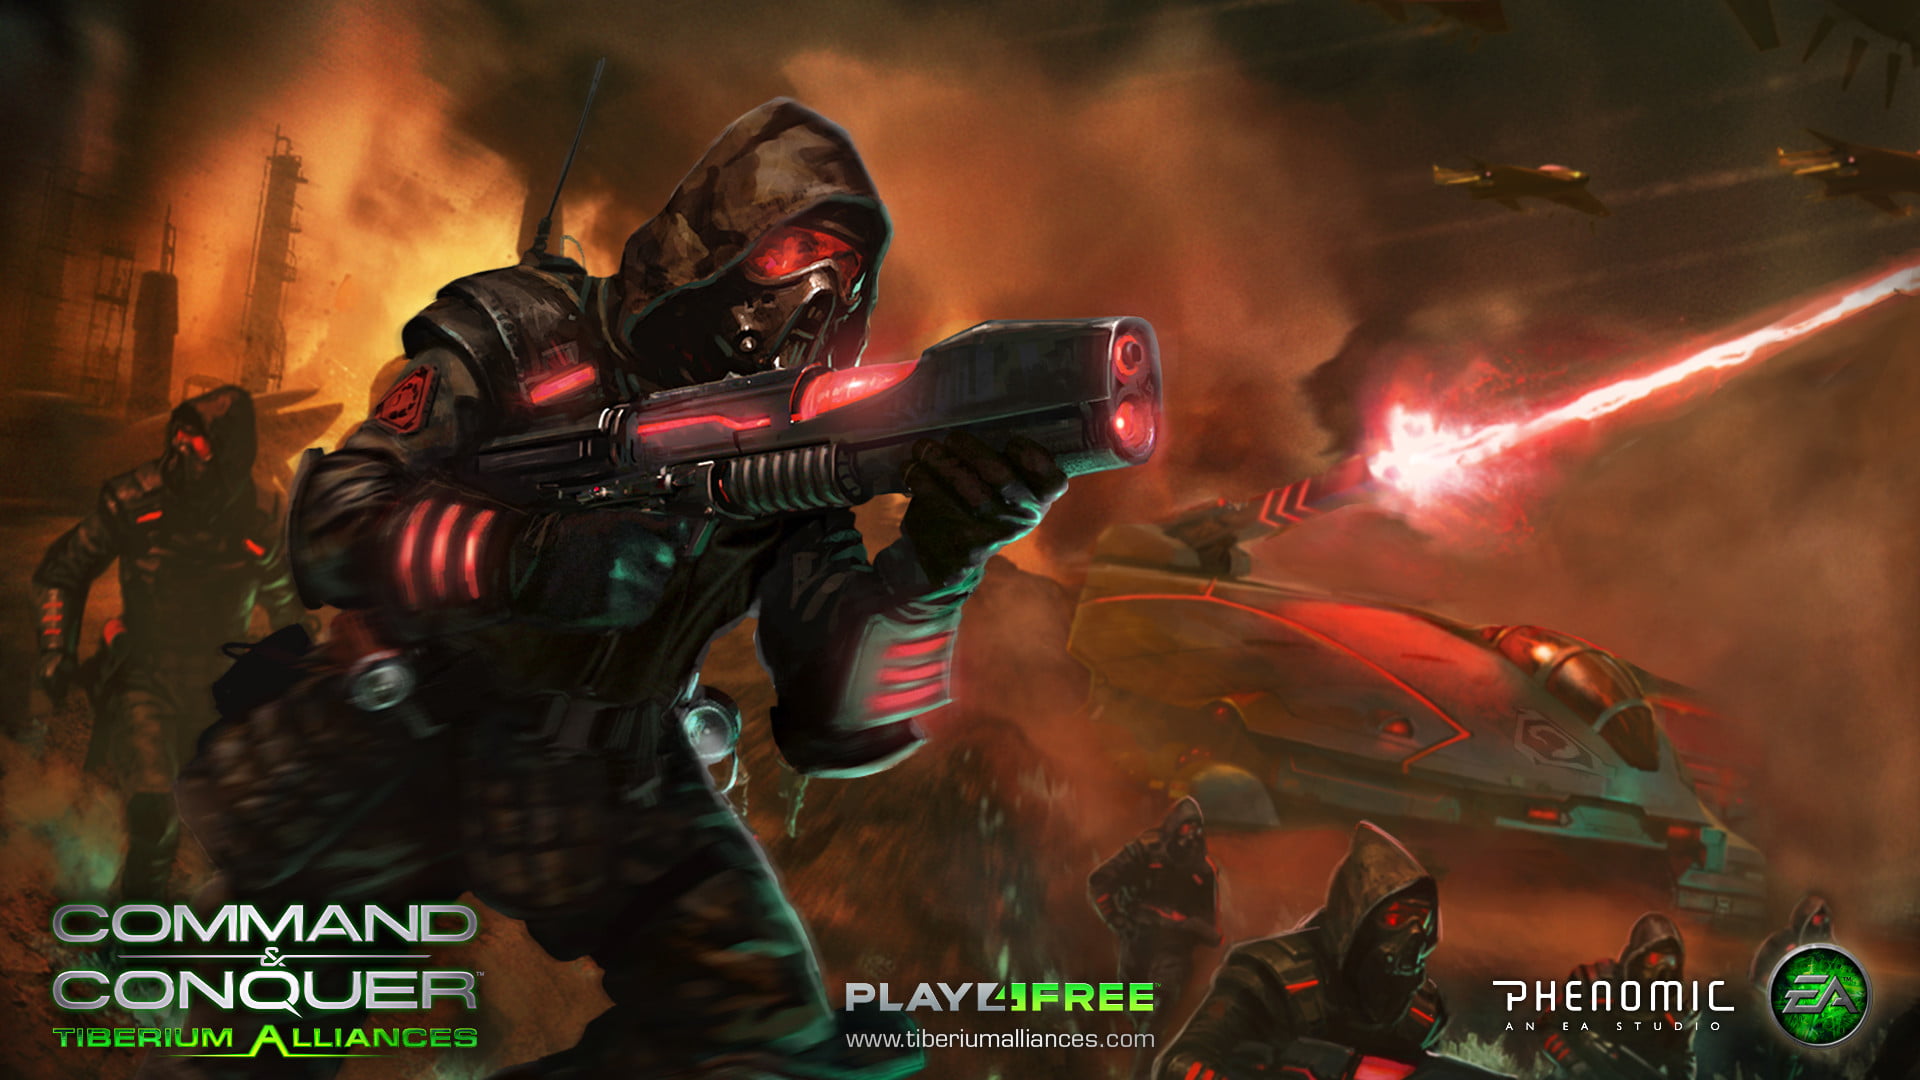 command and conquer 3 tiberium wars v1.09 nocd patch